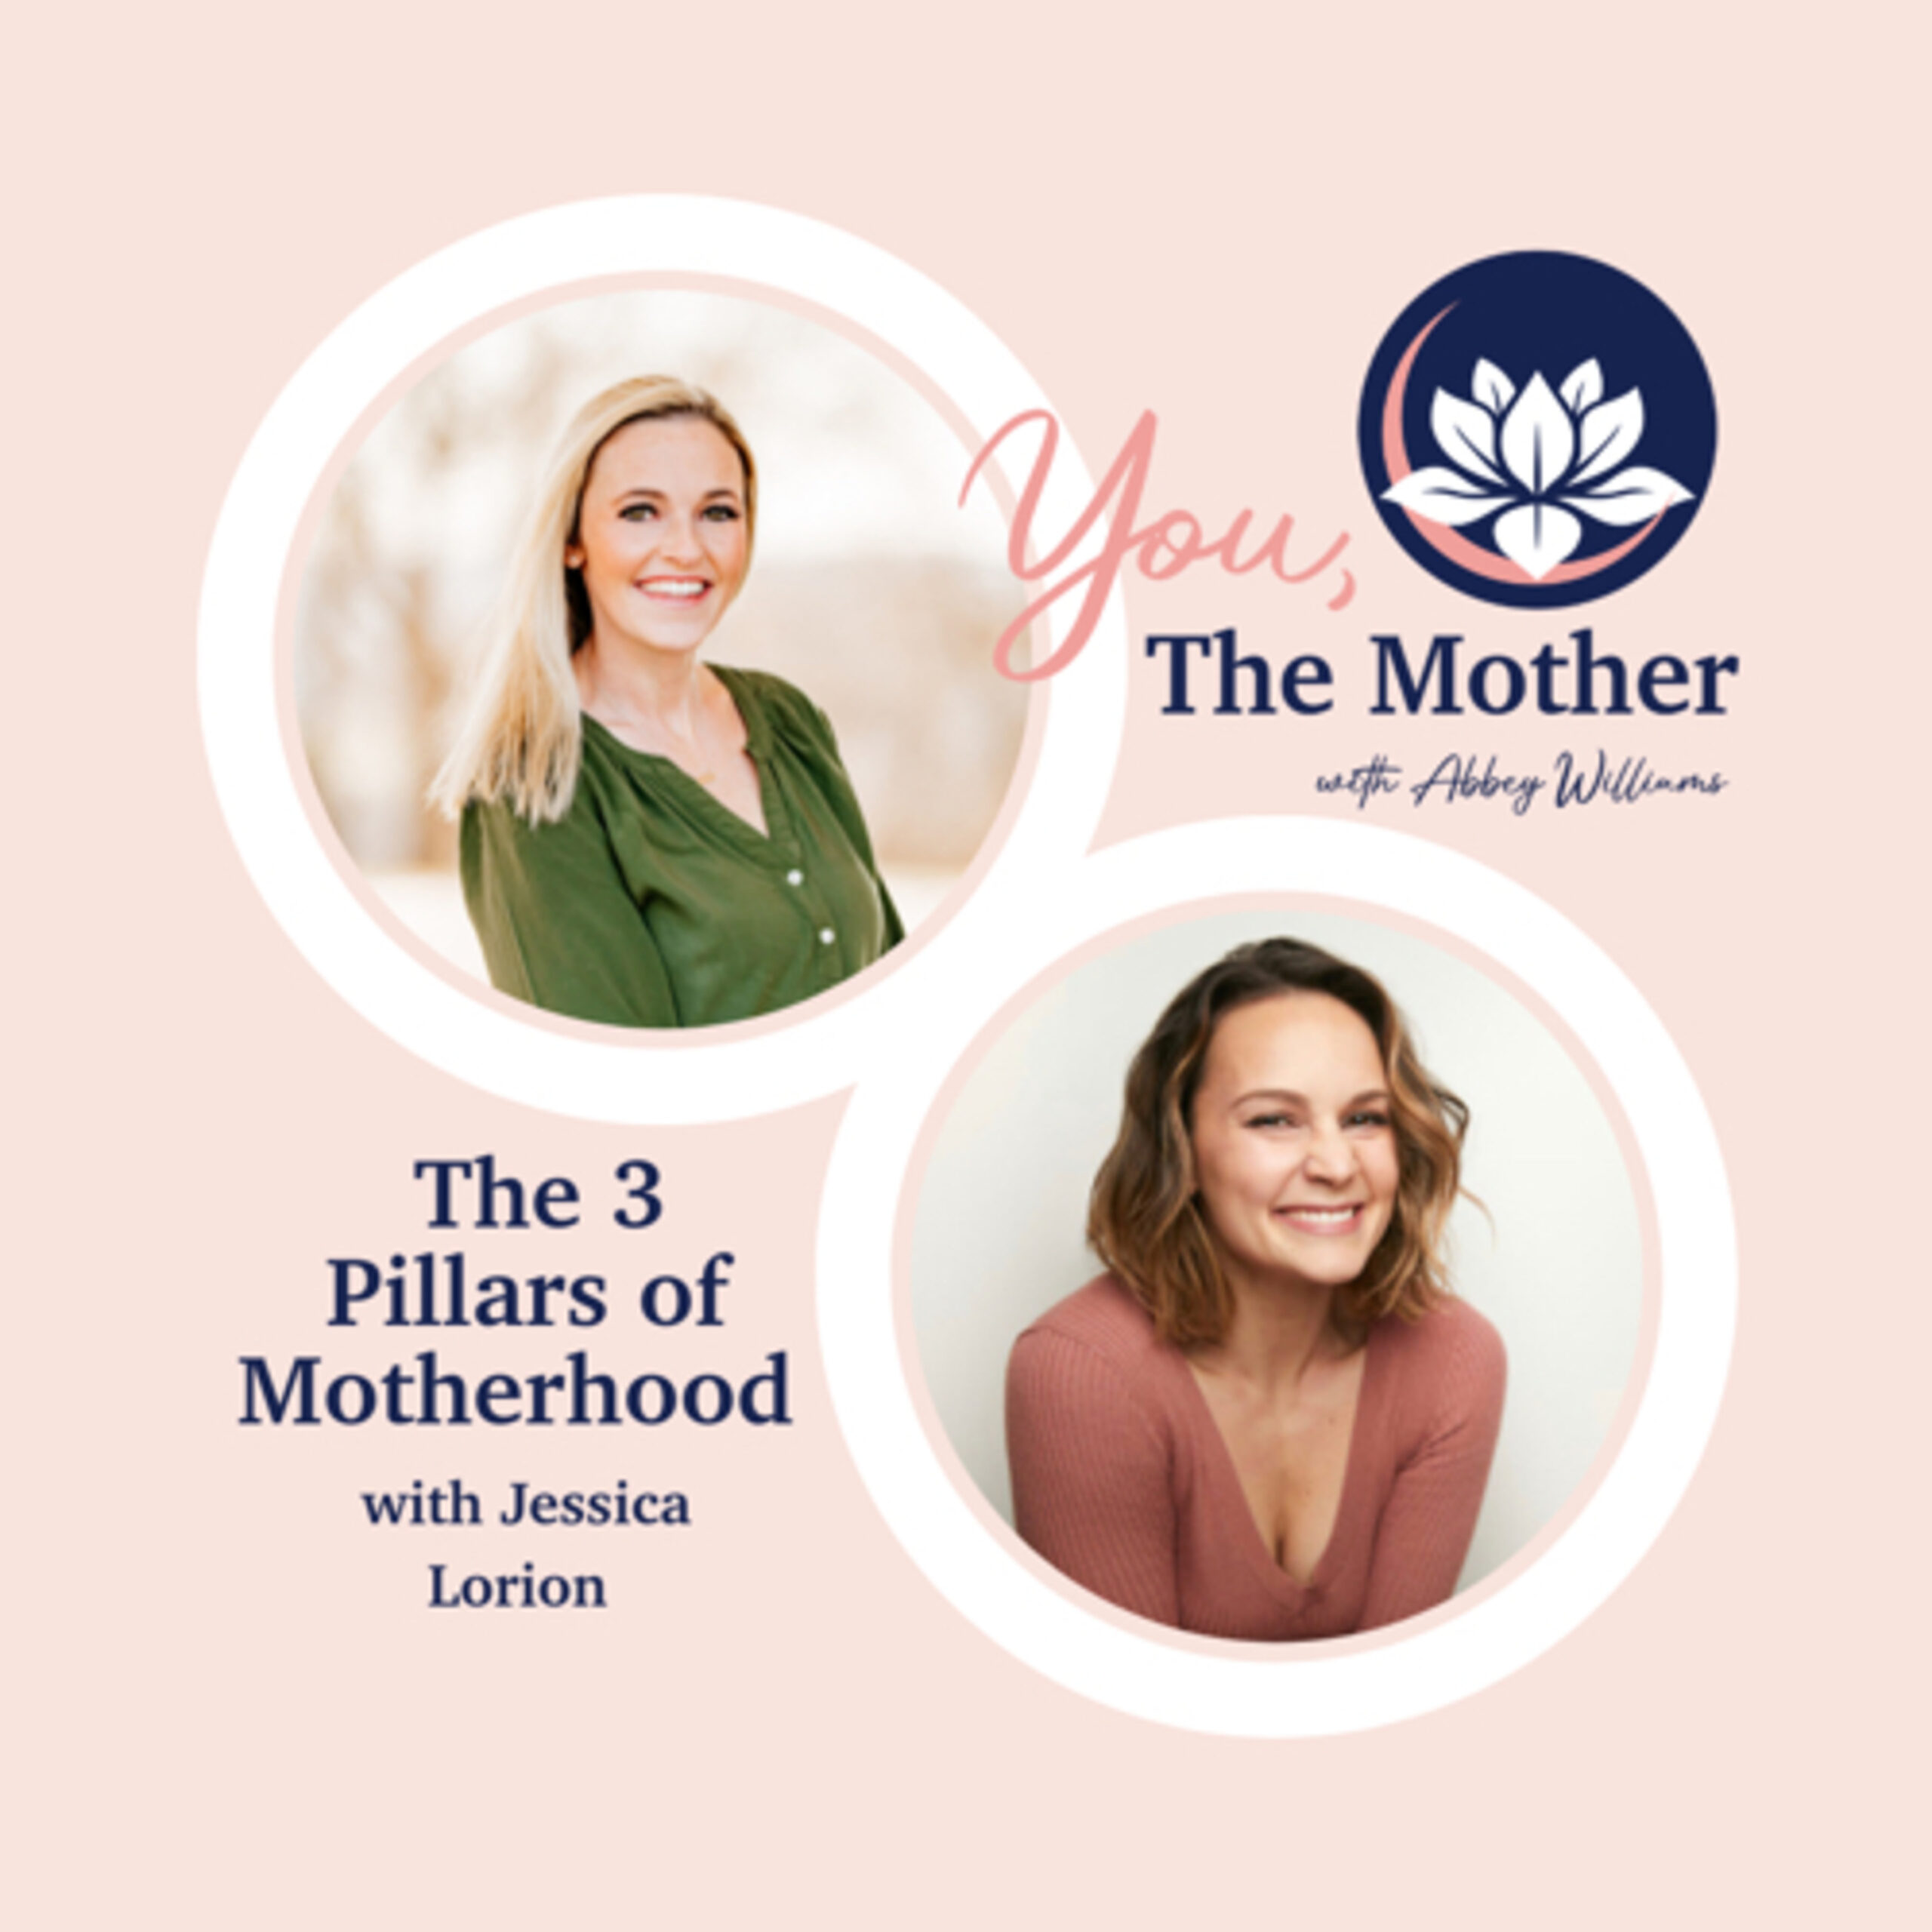 The 3 Pillars of Motherhood with Jessica Lorion